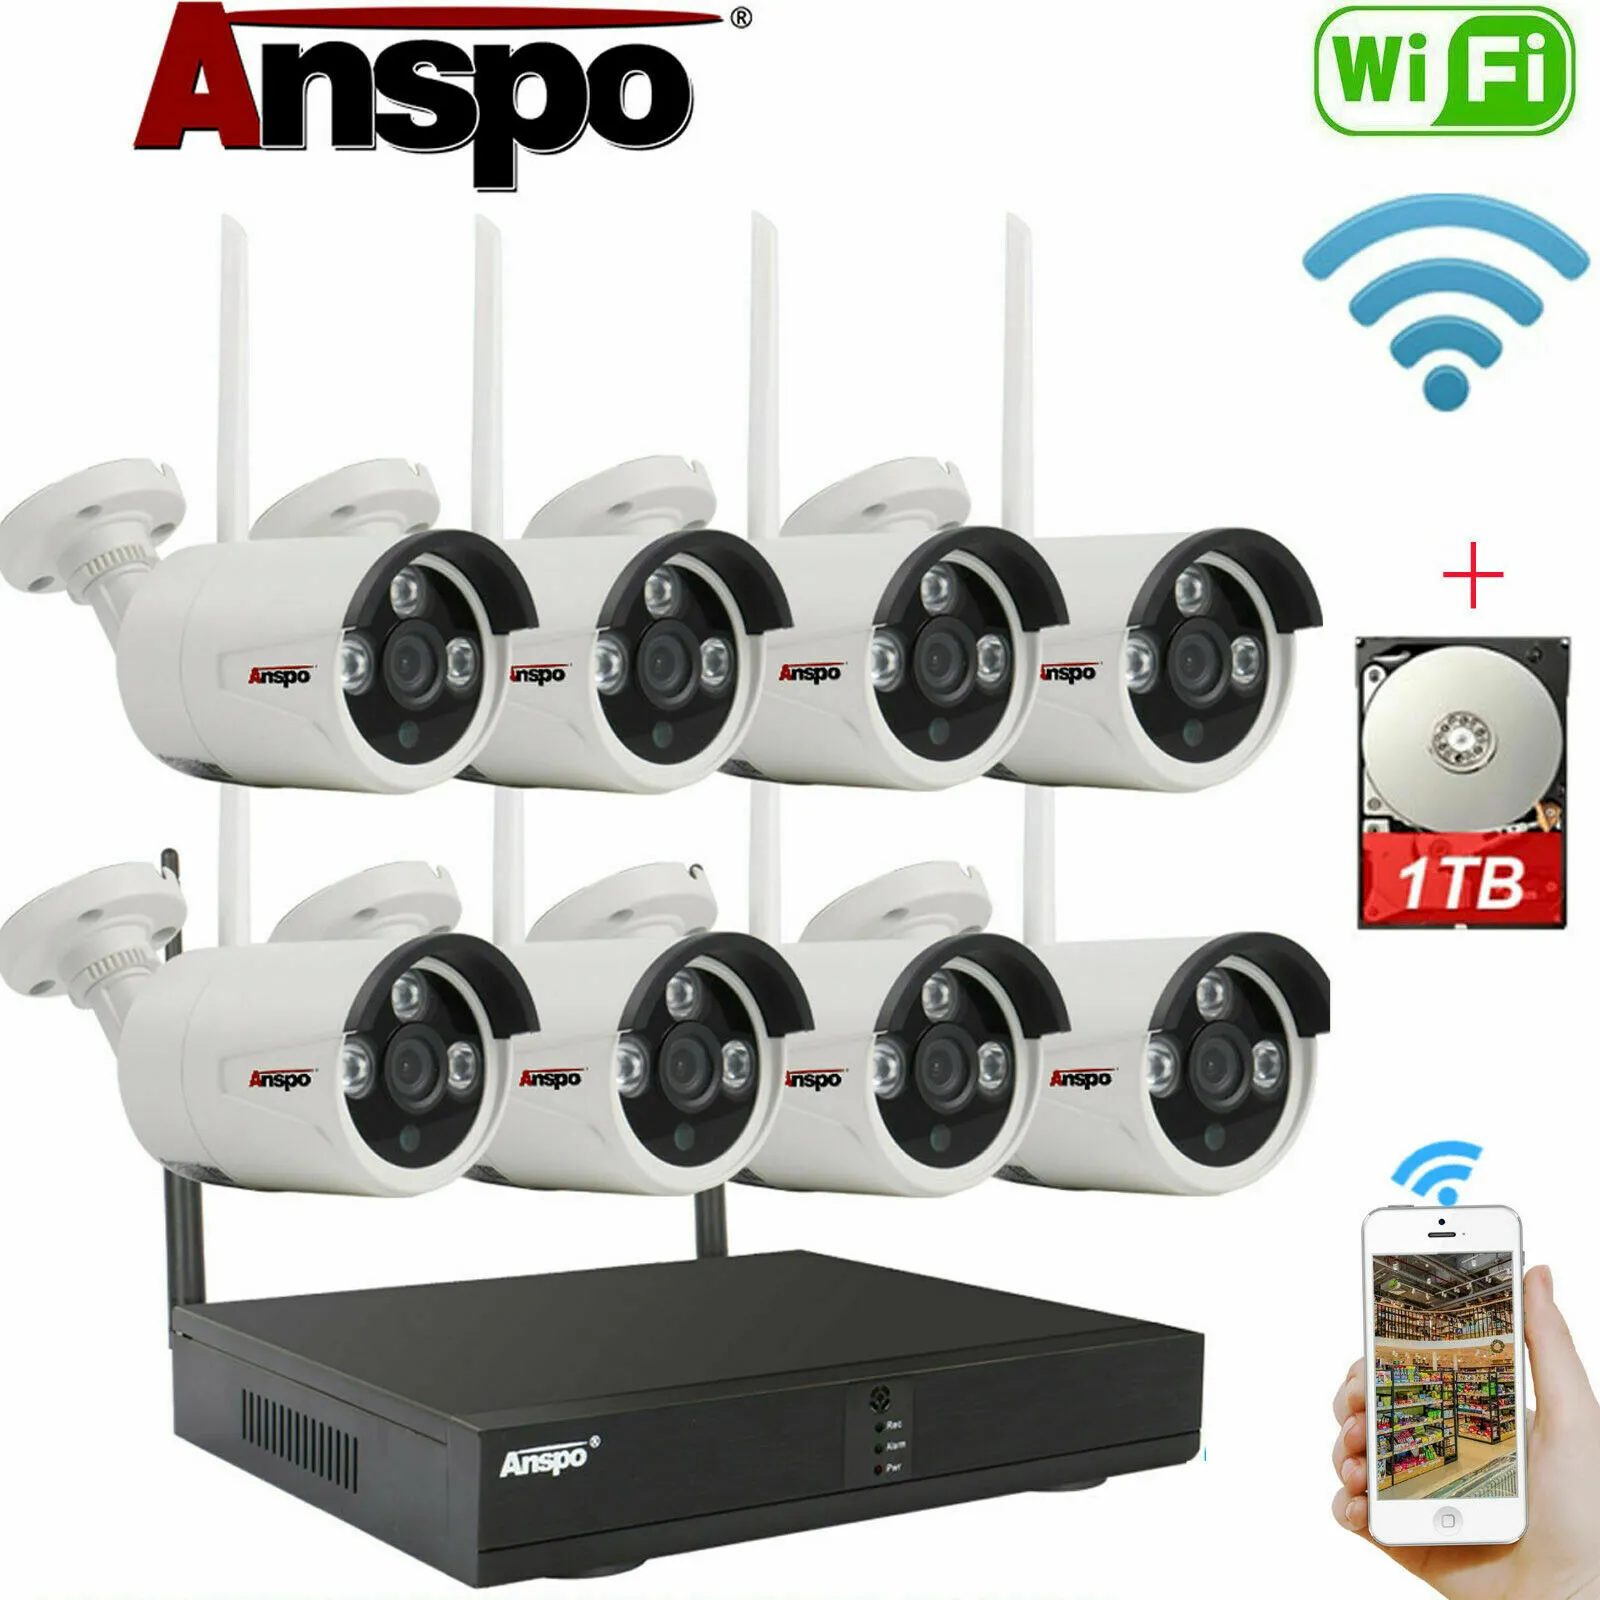 Anspo 8CH Wireless Security Camera System WiFi Camera Kit IR-Cut Night Vision CCTV Home Surveillance NVR with 1TB Hard Drive